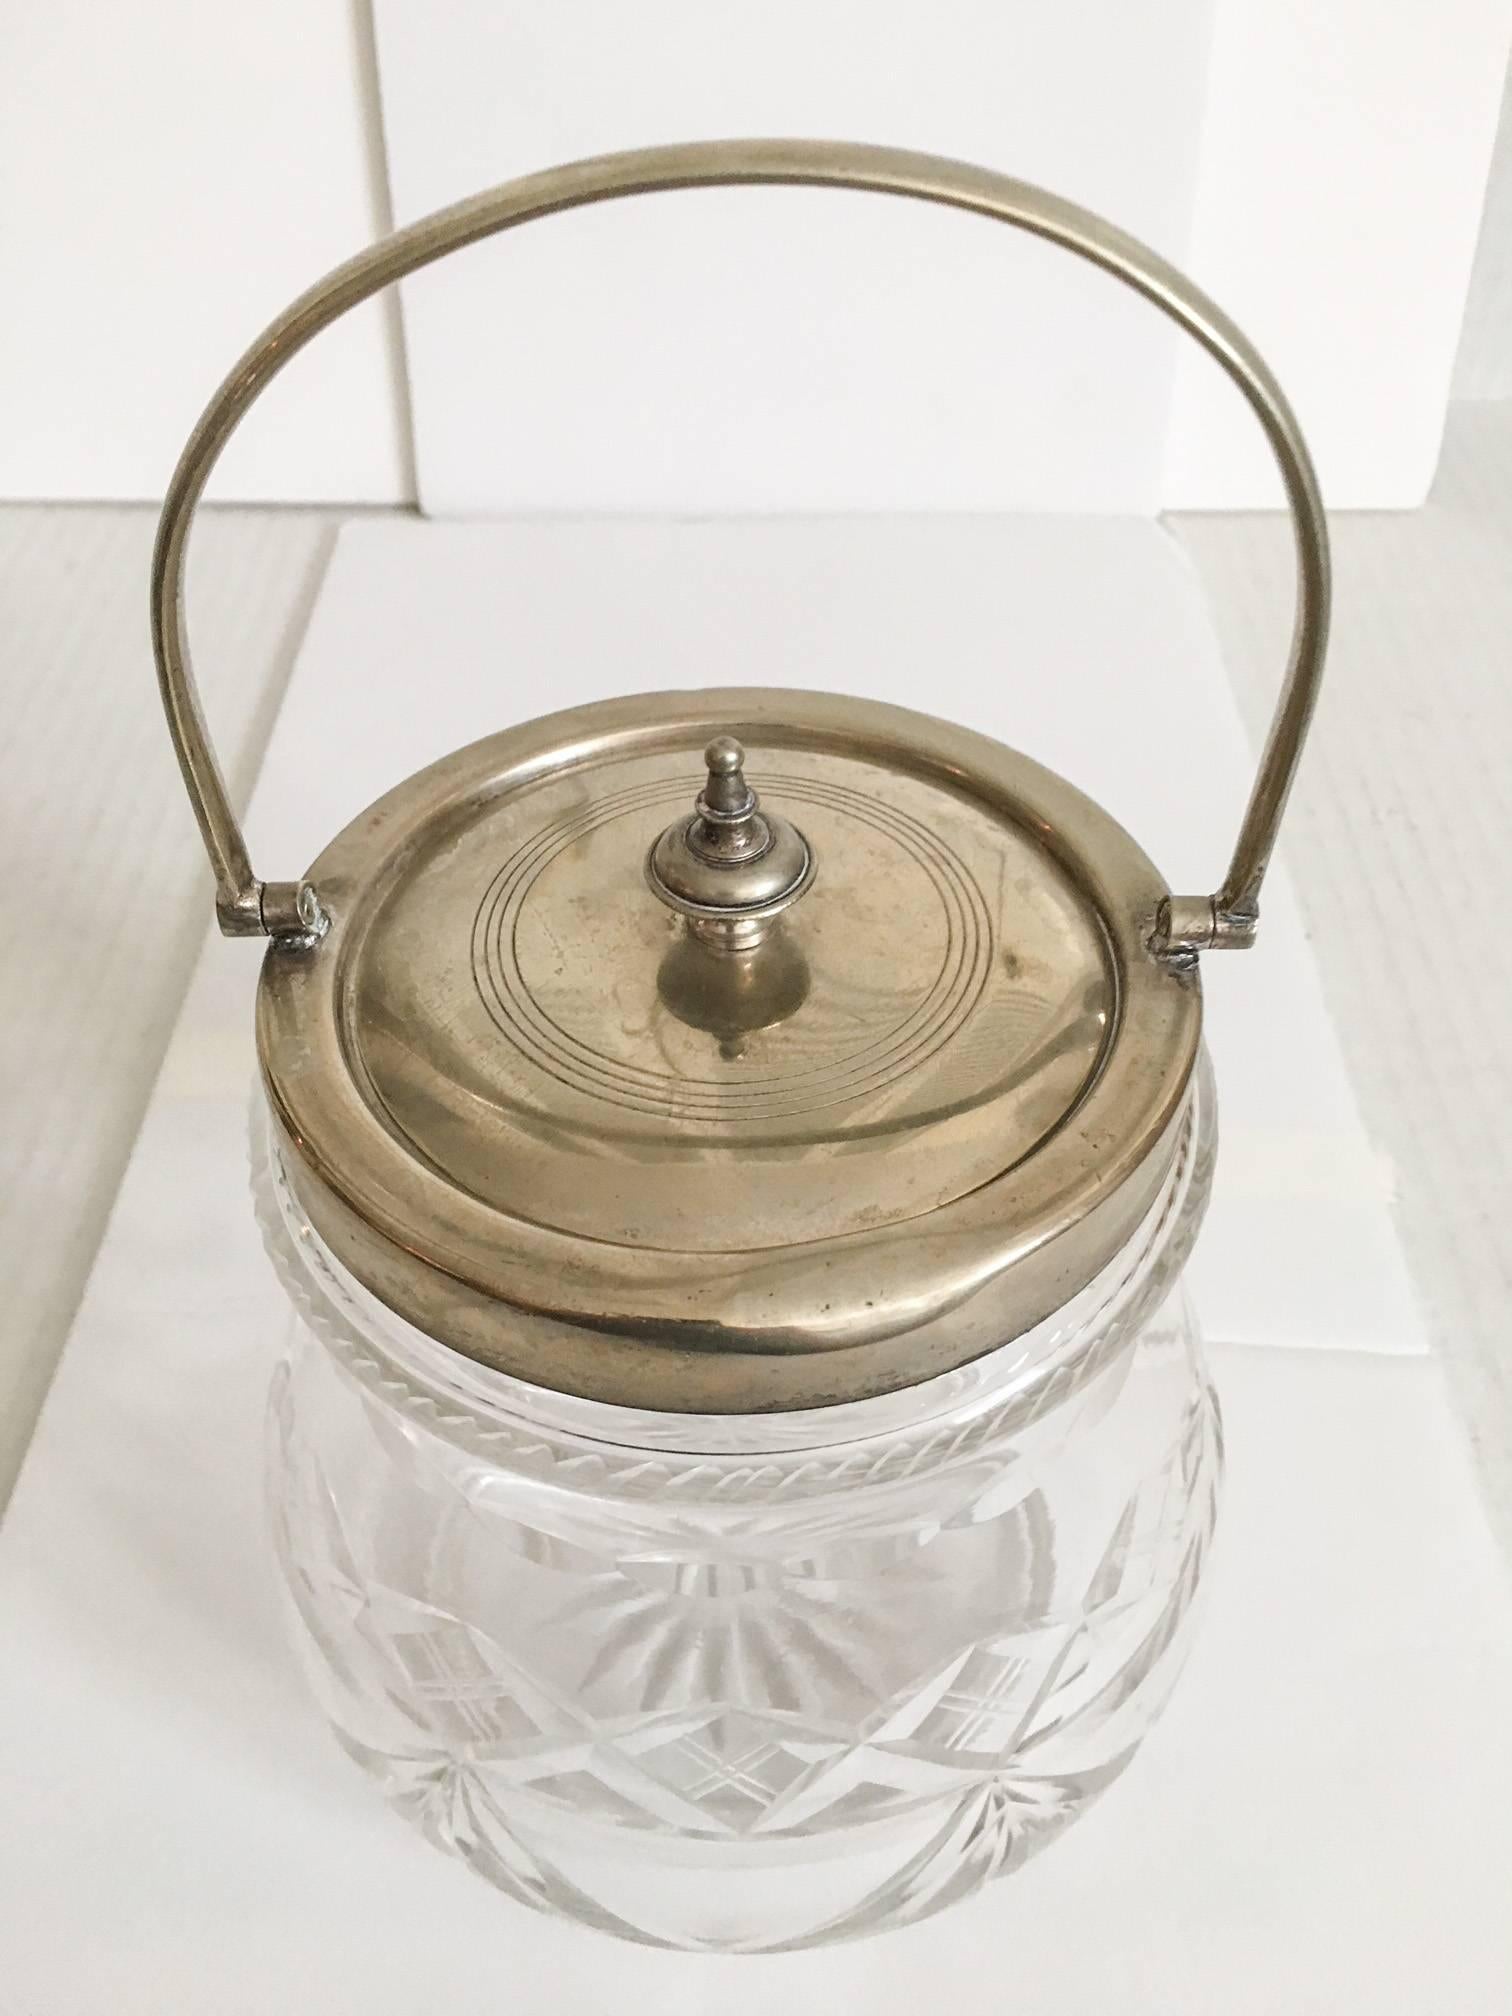 British Colonial 1930s Slack and Barlow English Cut-Glass and Silver Biscuit Jar